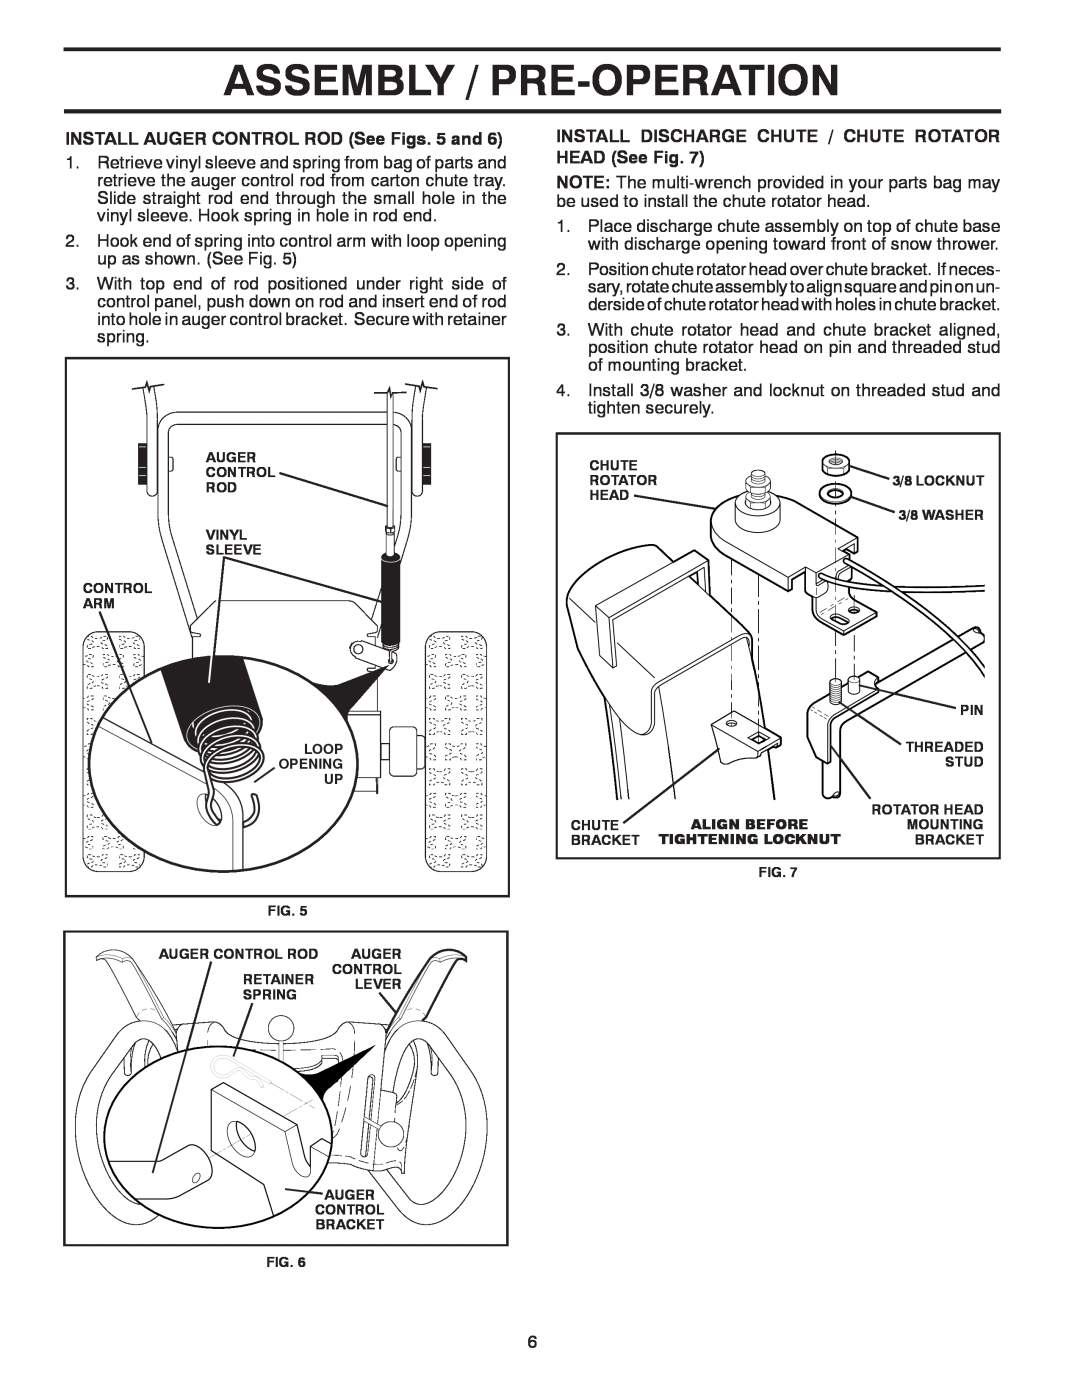 Poulan 437970, 96192003503 owner manual Assembly / Pre-Operation, INSTALL AUGER CONTROL ROD See Figs. 5 and 